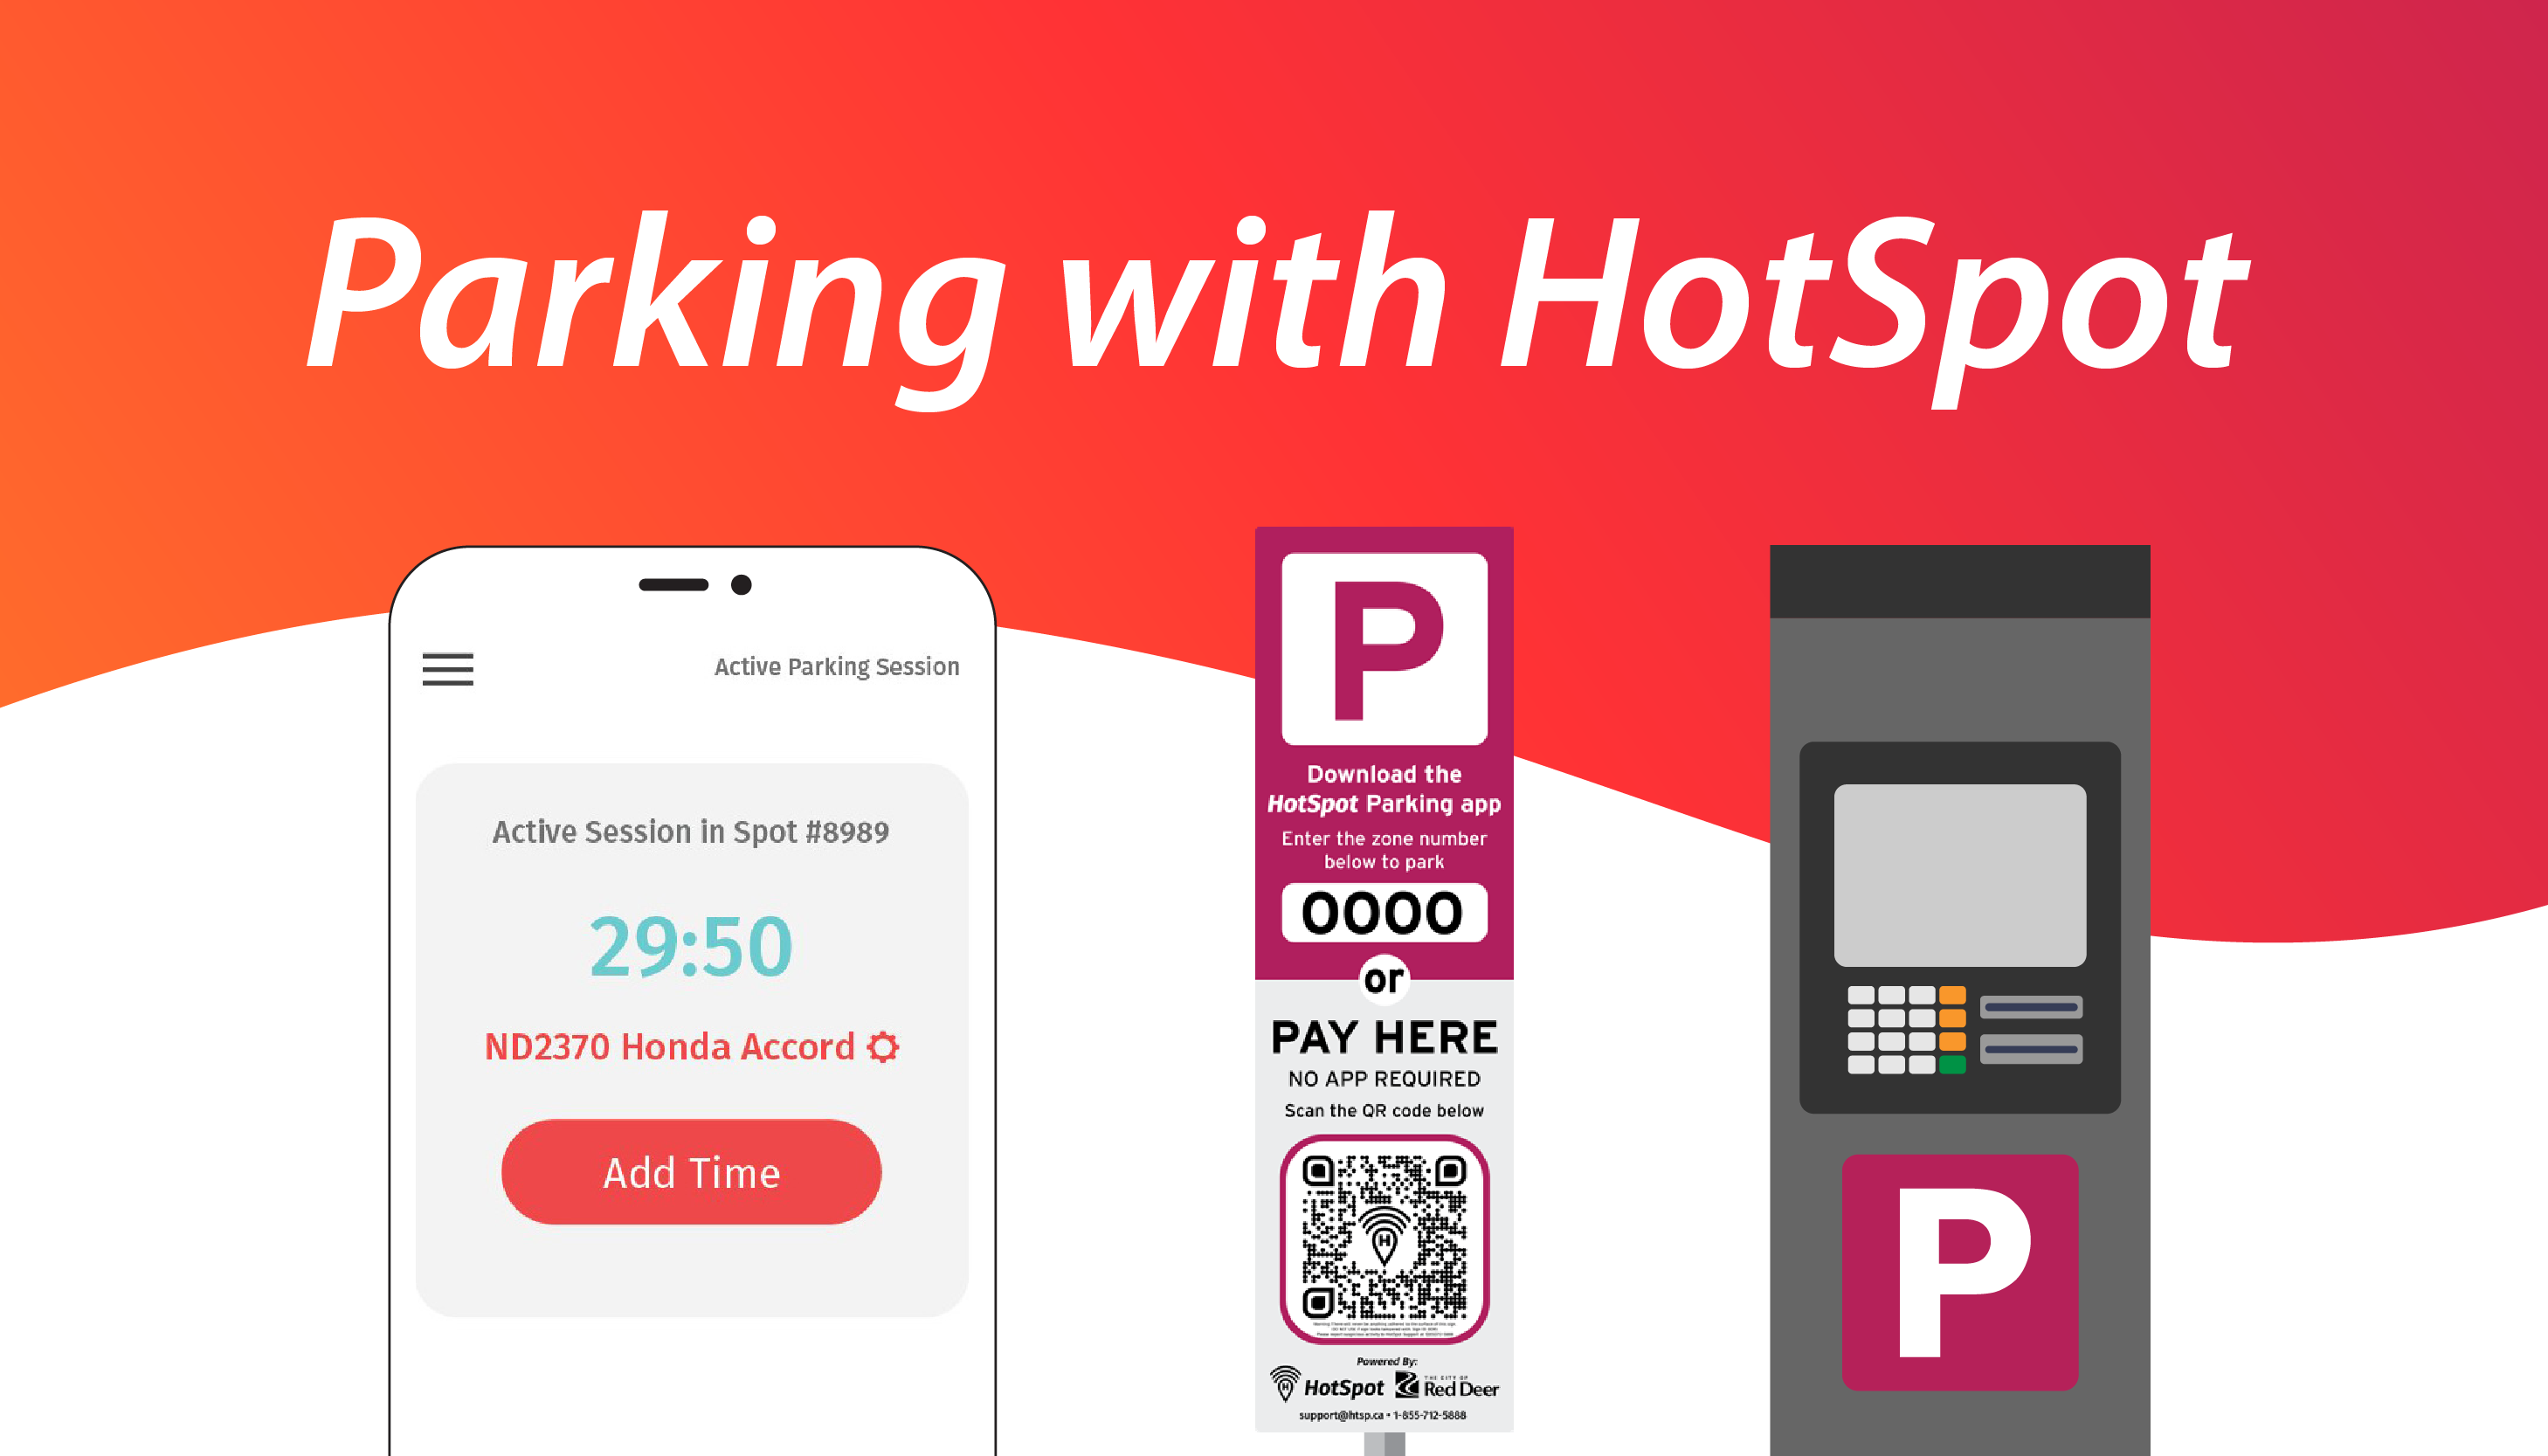 Parking with HotSpot is easy!